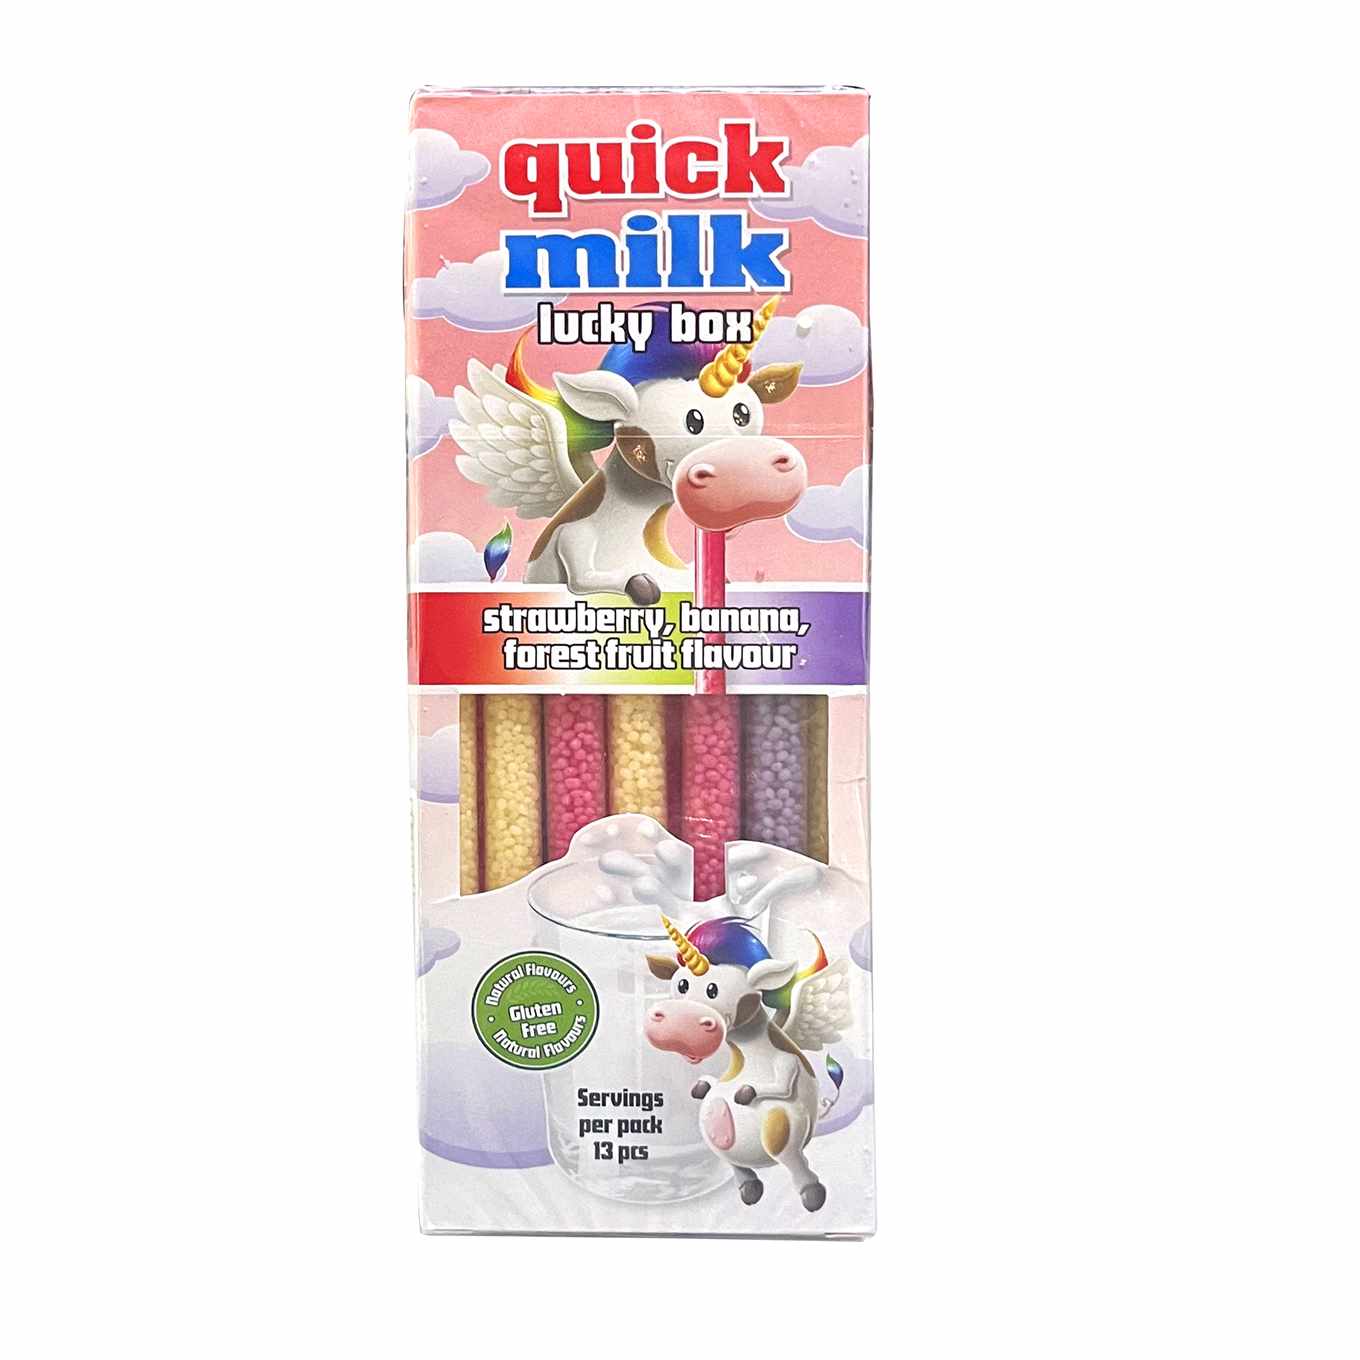 Quick Milk Lucky Box Strawberry, Banana & Forest Fruit Flavour -  pack of 13, 3Y+